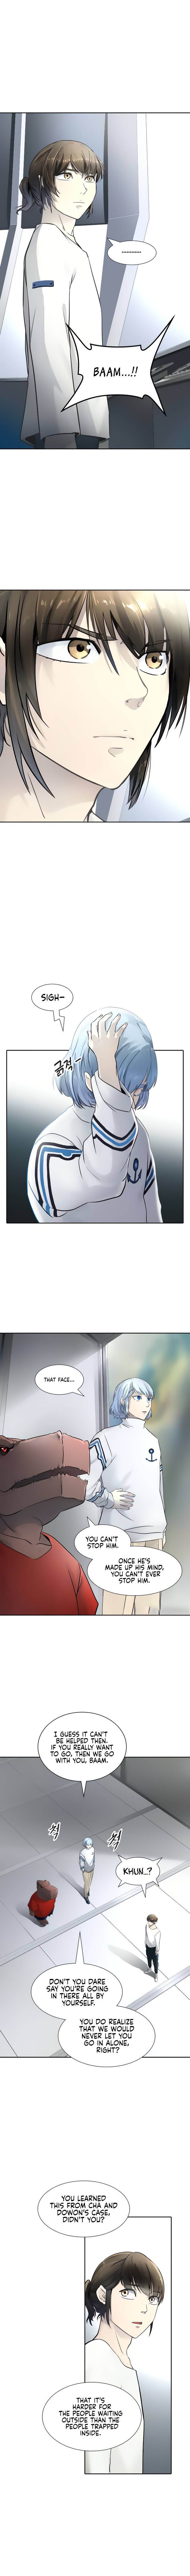 Tower Of God 516 6